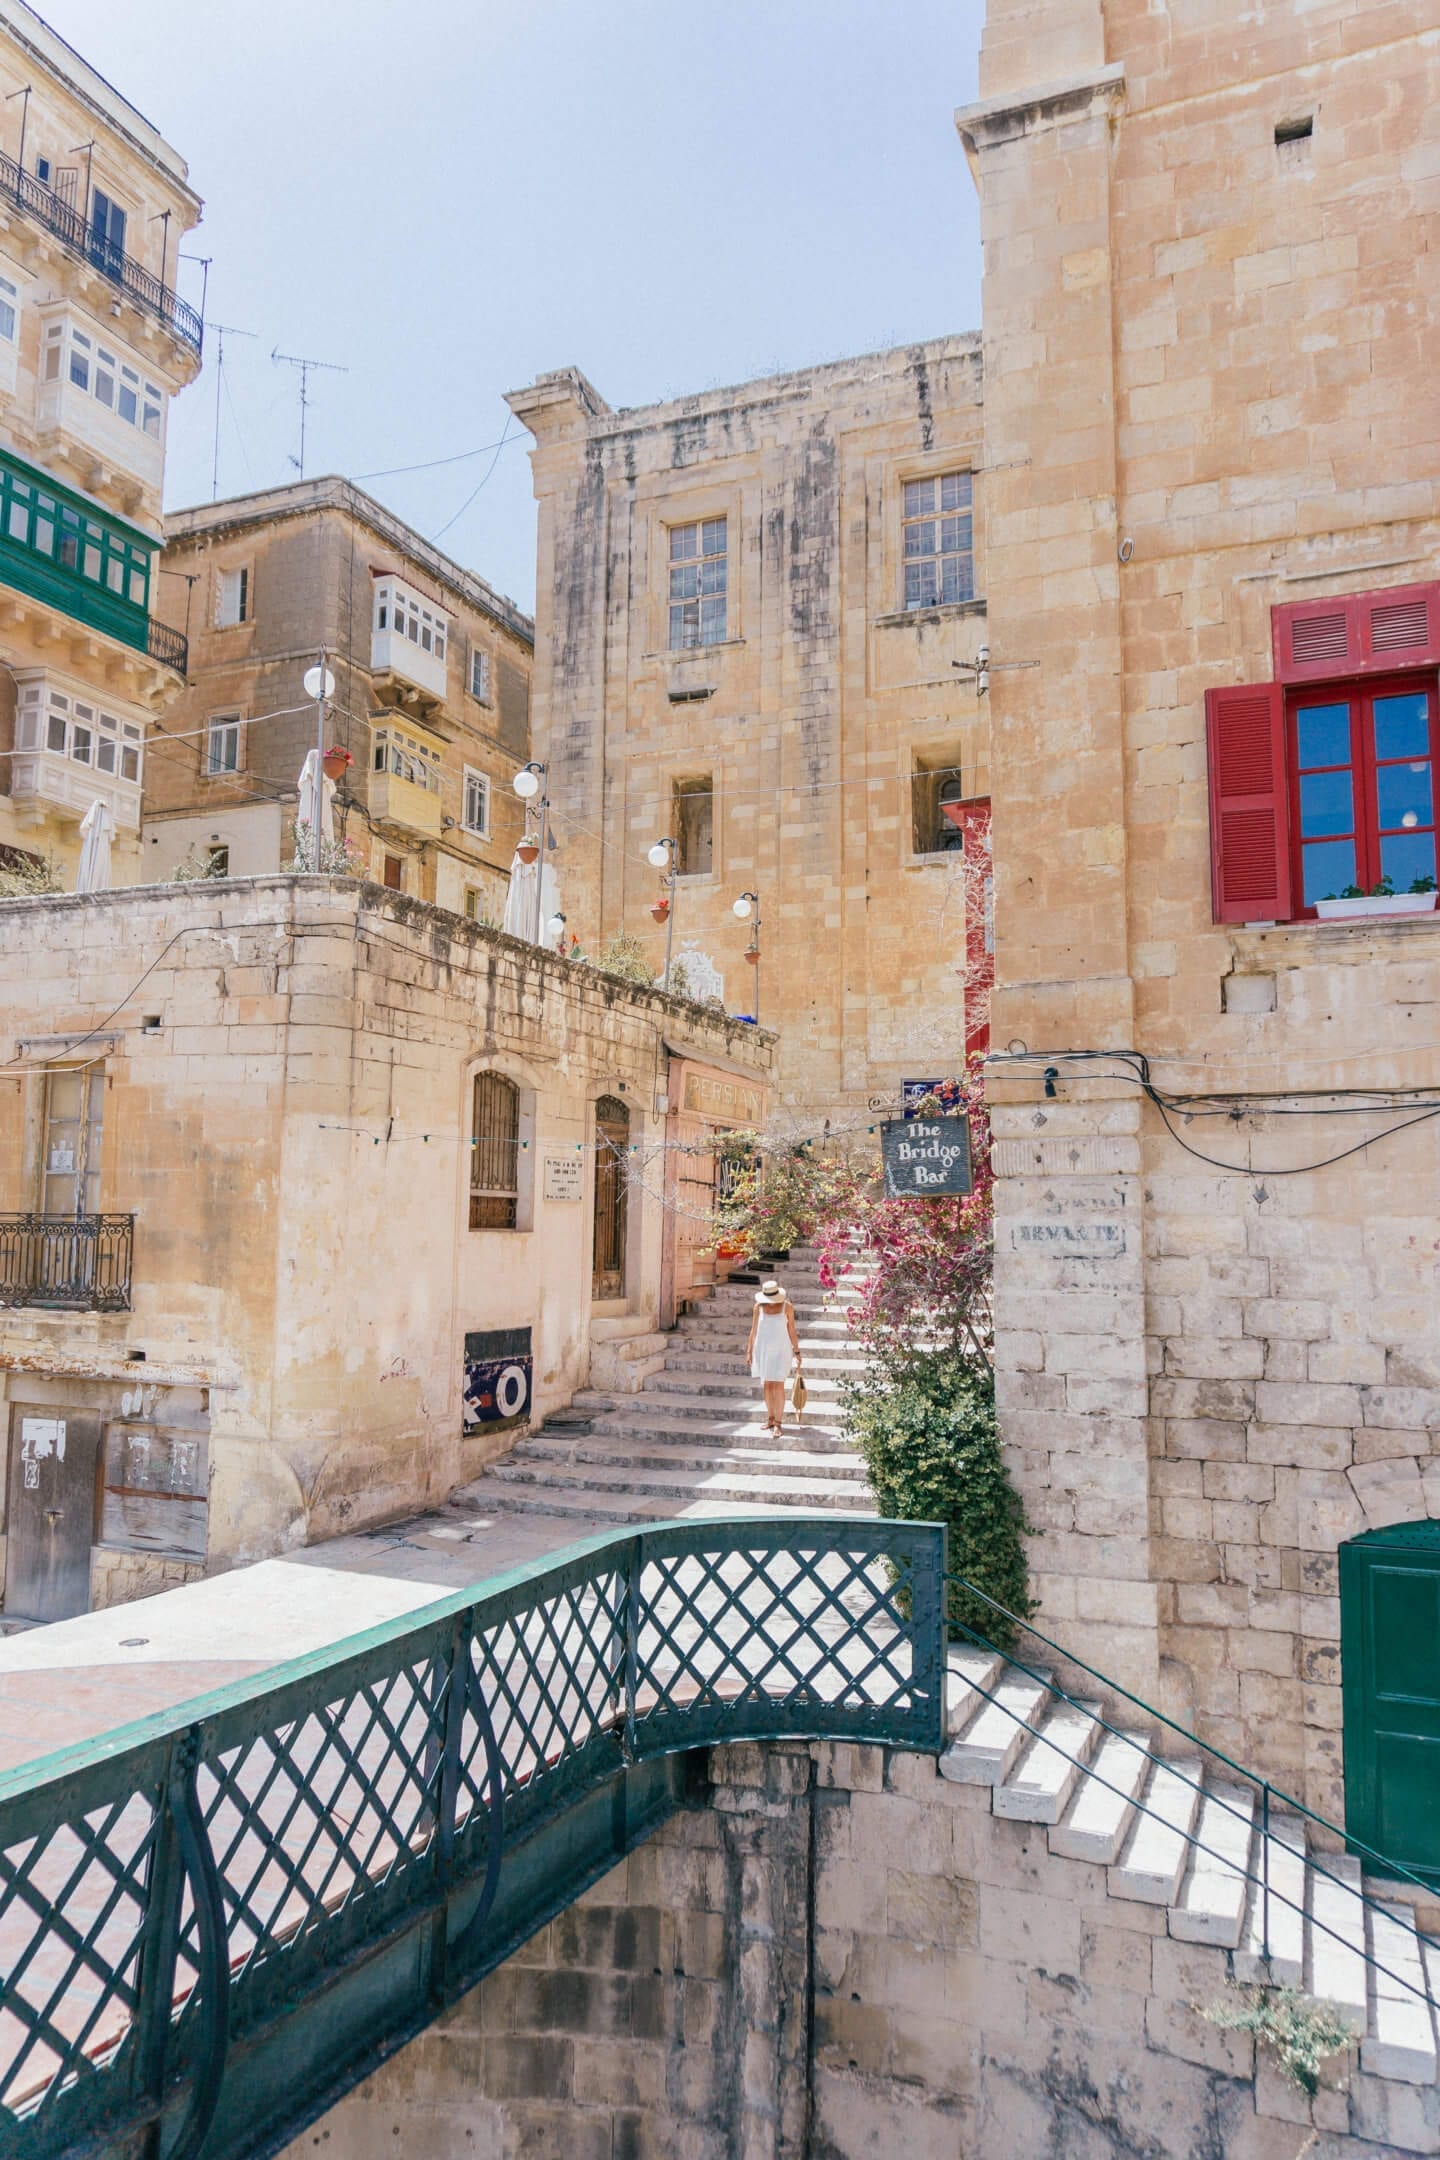 Malta is not only inexpensive and beautiful, it is also one of the most Romantic Places in Europe